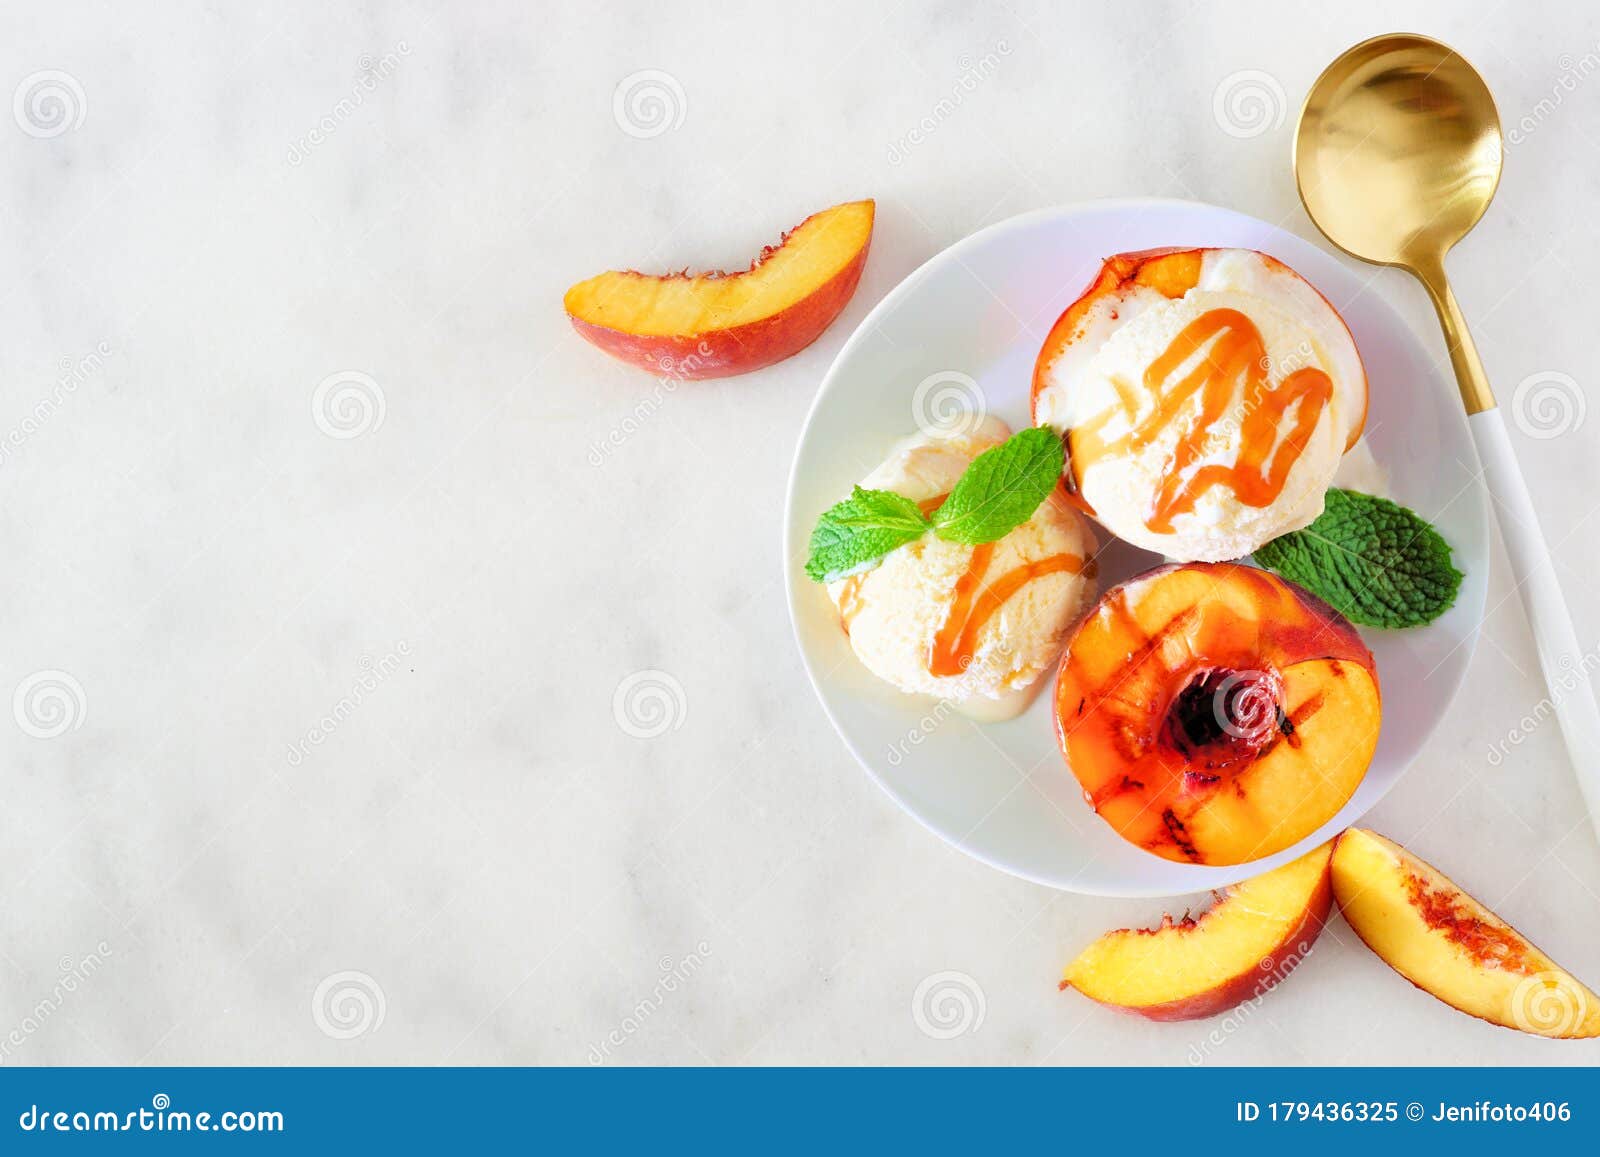 delicios grilled peaches with vanilla ice cream, top view table scene on a white marble background